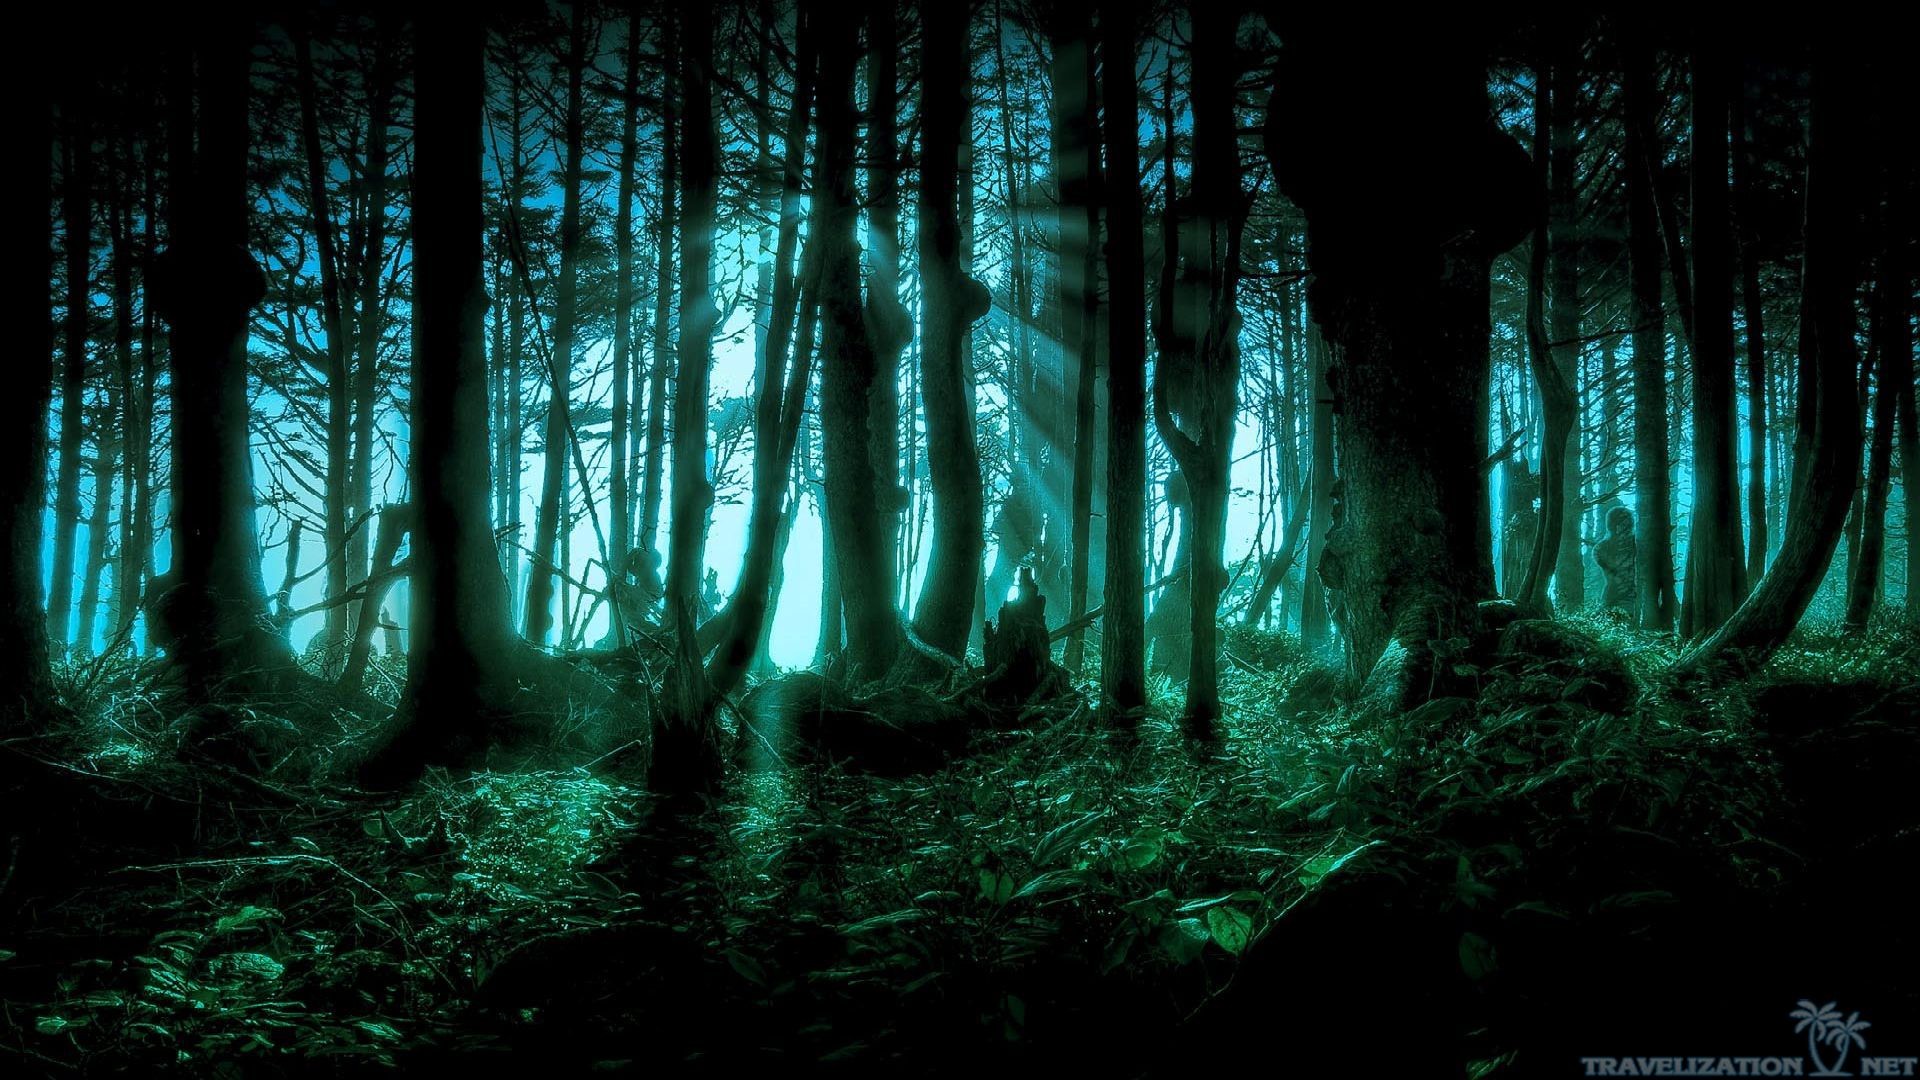 You can find Dark Nature wallpapers in many resolution such as 1024768, 12801024, 1366768,